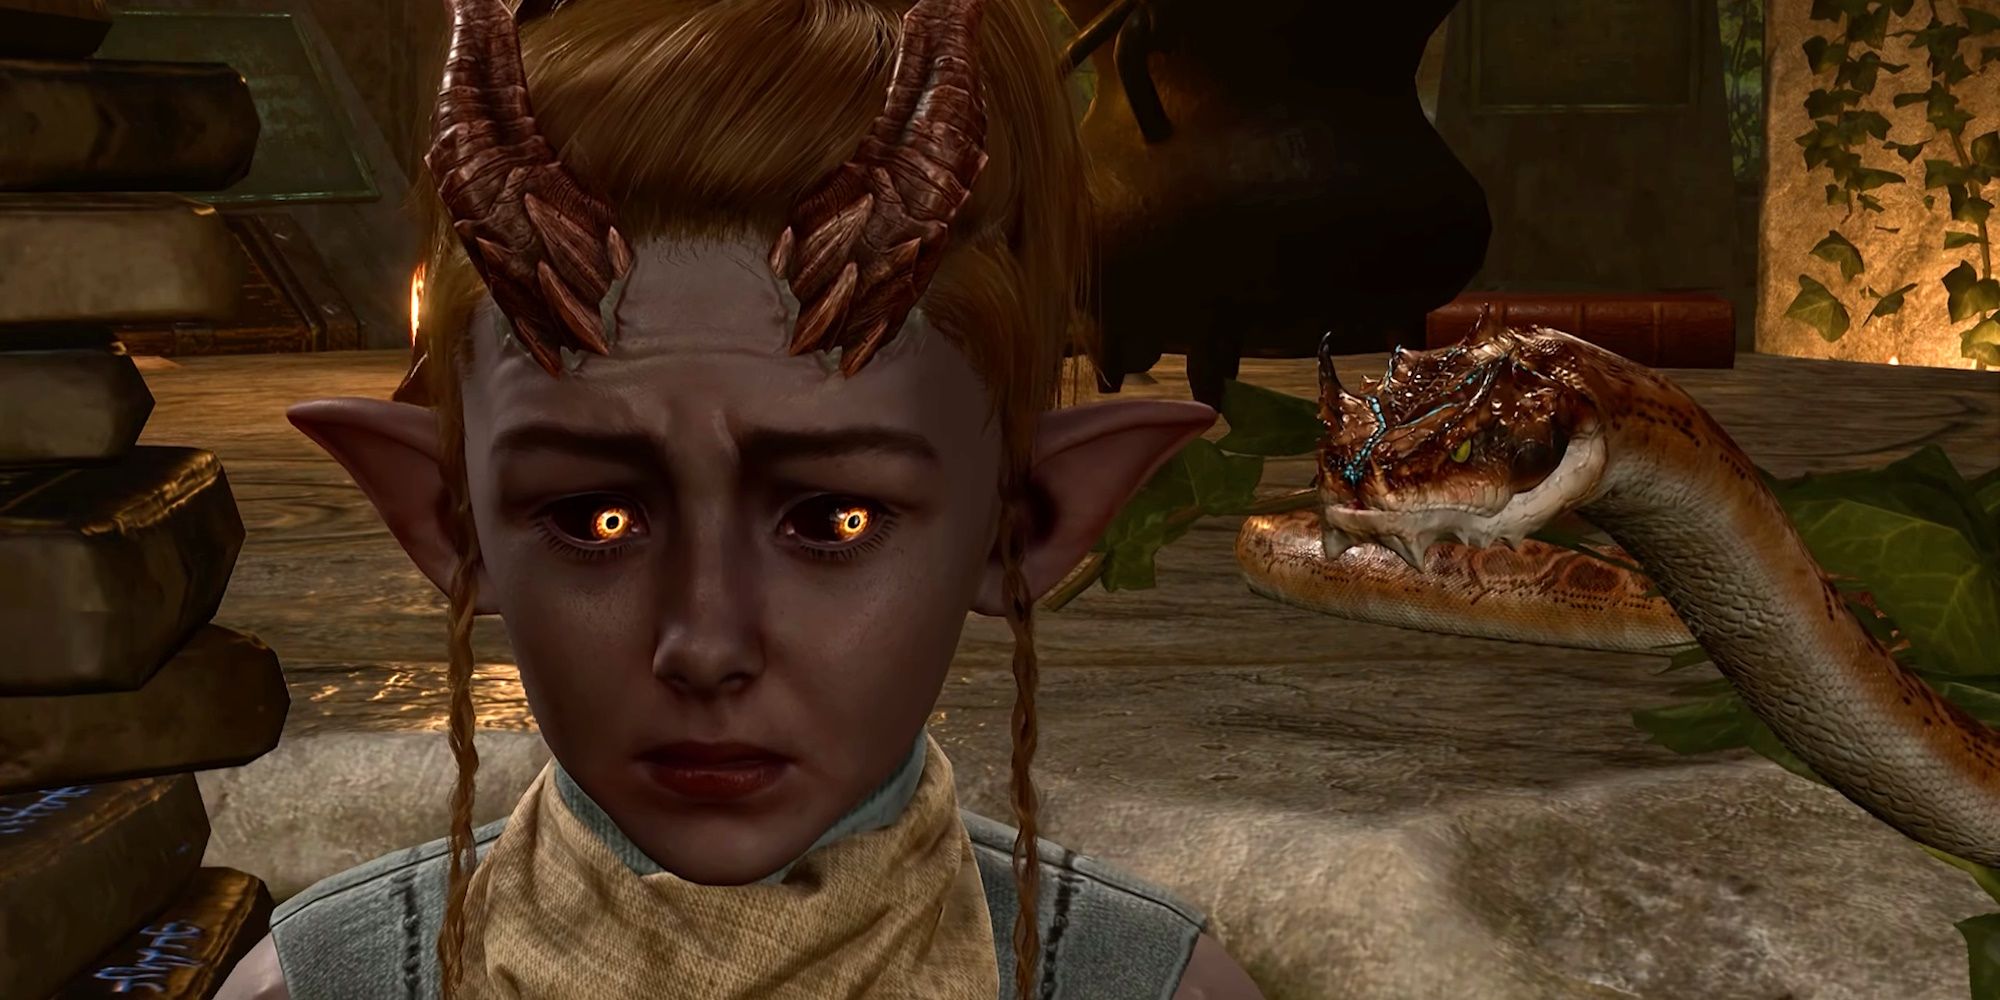 The young tiefling child Arabella looks terrified as a snake threatens her in Baldur's Gate 3